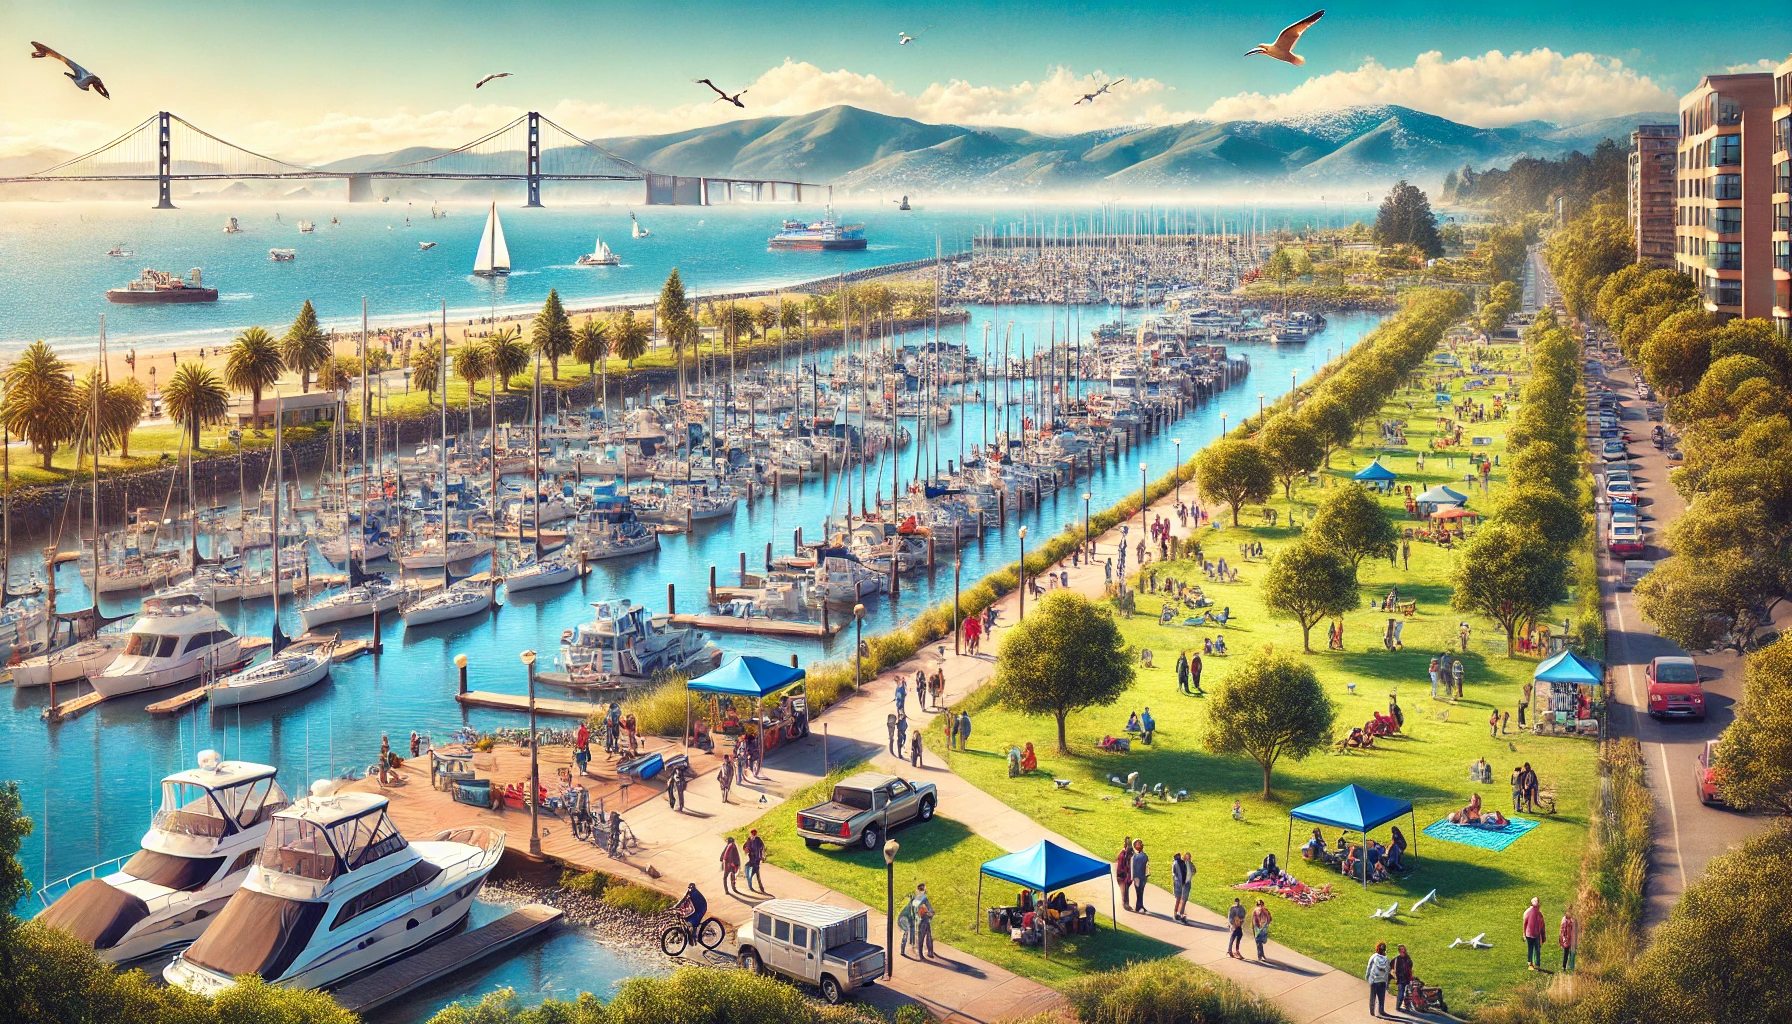 A panoramic view of Berkeley Marina featuring a bustling marina with various boats and yachts docked, people jogging and cycling along the waterfront, lush green parks, and scenic walking trails. The backdrop includes the San Francisco Bay with a clear sky and the distant silhouette of the Golden Gate Bridge. Seagulls are flying above, and families are picnicking in grassy areas, capturing the lively atmosphere of this popular hub.